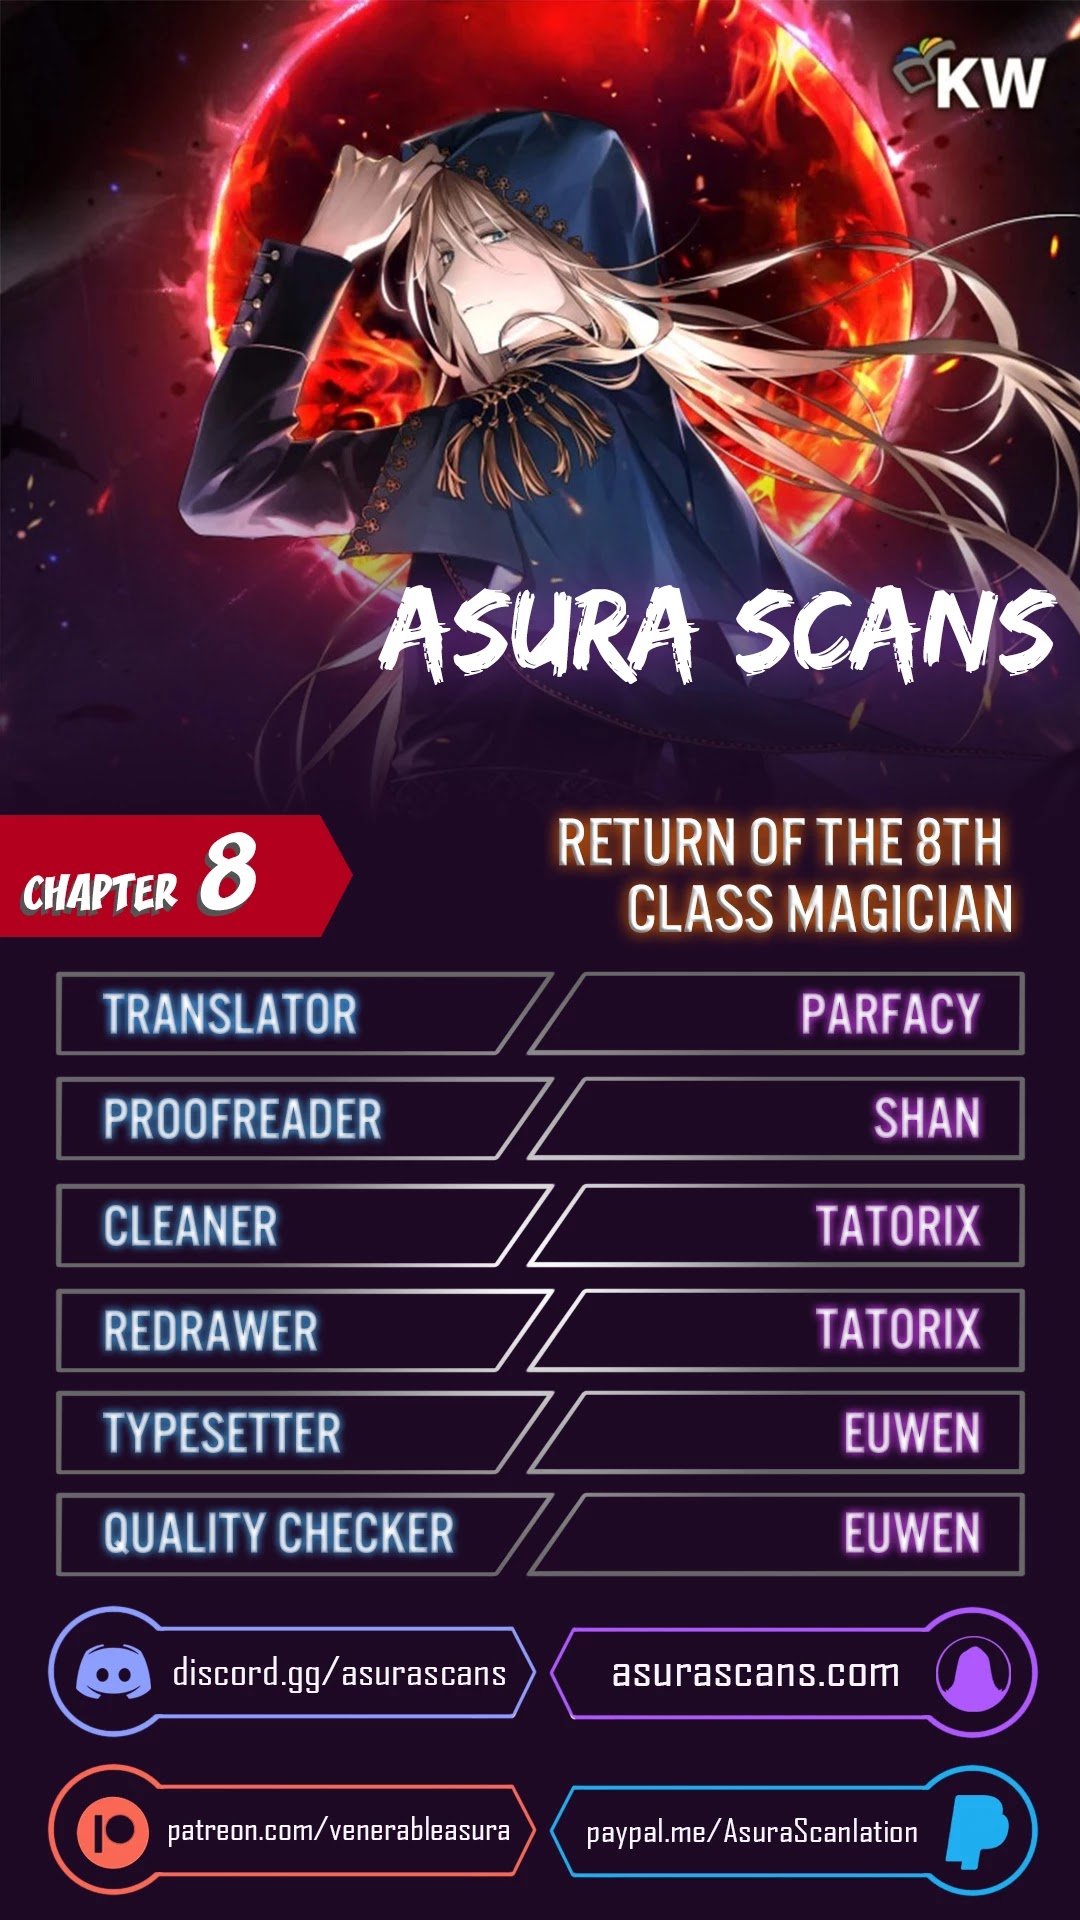 Return of the 8th class Magician chapter 8